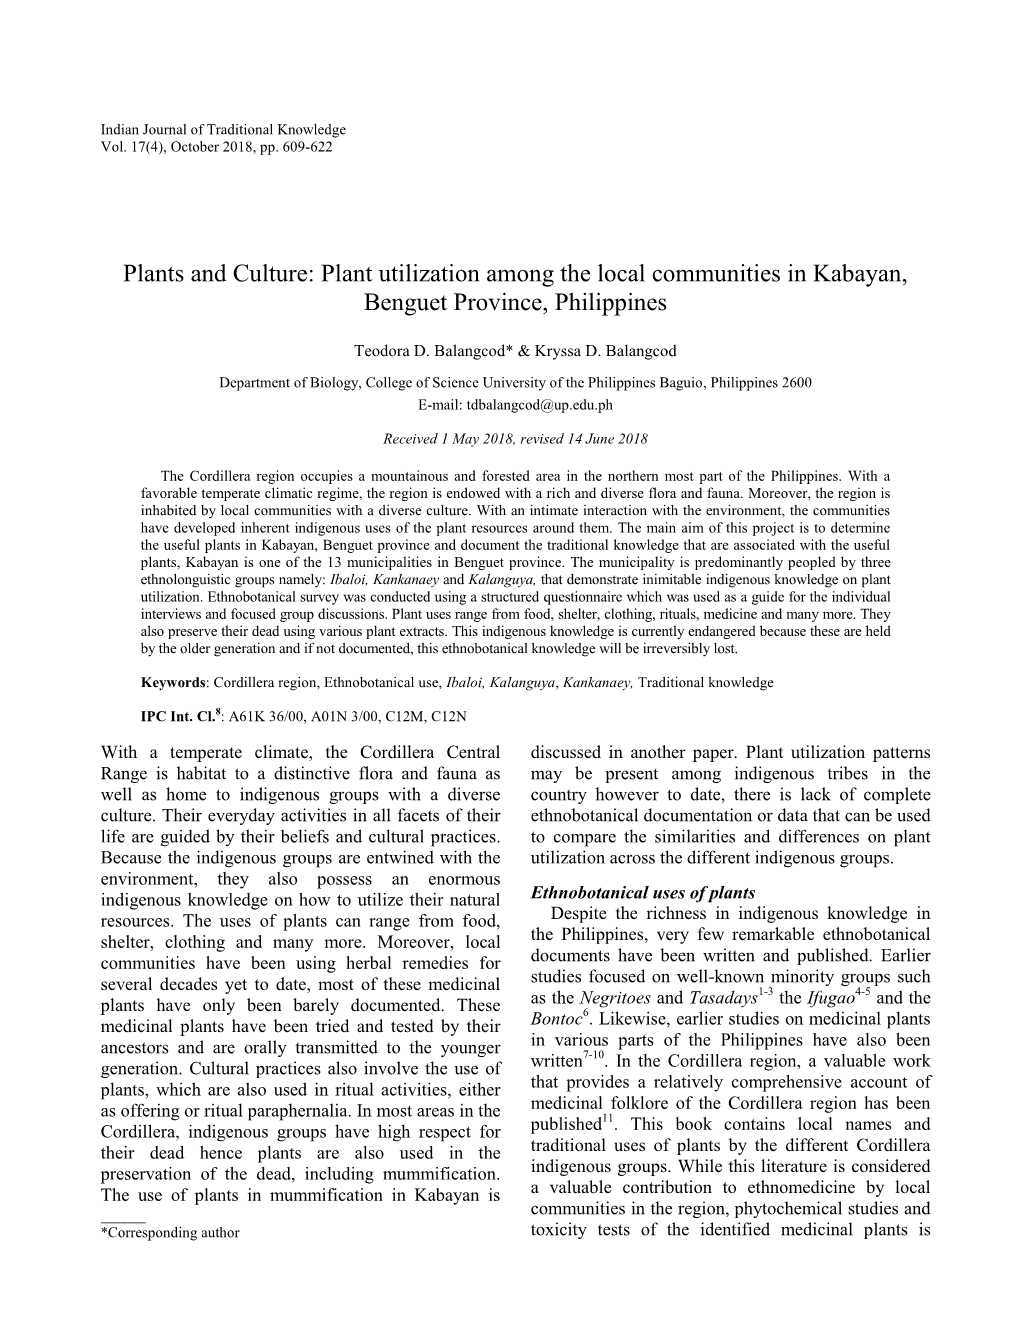 Plants and Culture: Plant Utilization Among the Local Communities in Kabayan, Benguet Province, Philippines